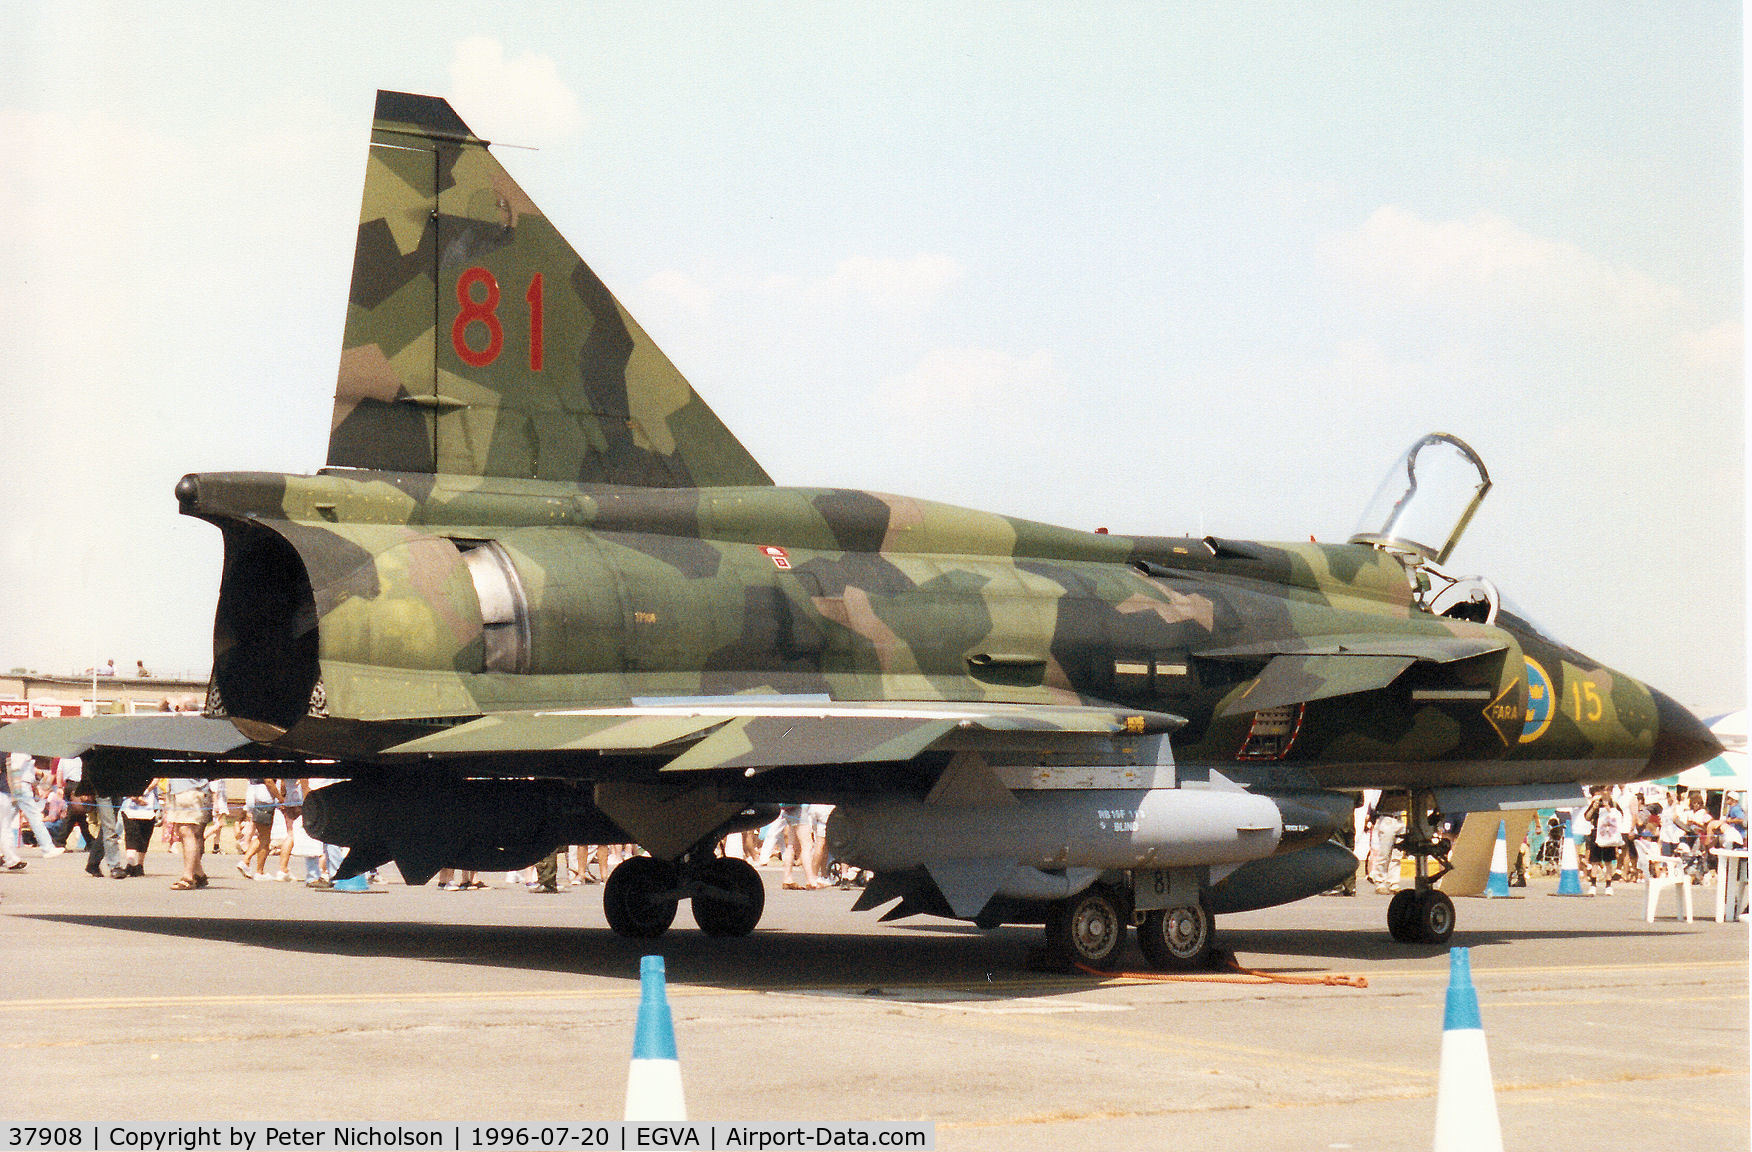 37908, Saab SH 37 Viggen C/N 37908, Another view of the F15 Wing SH 37 Viggen of the Royal Swedish Air Force on display at the 1996 Royal Intnl Air Tattoo at RAF Fairford.